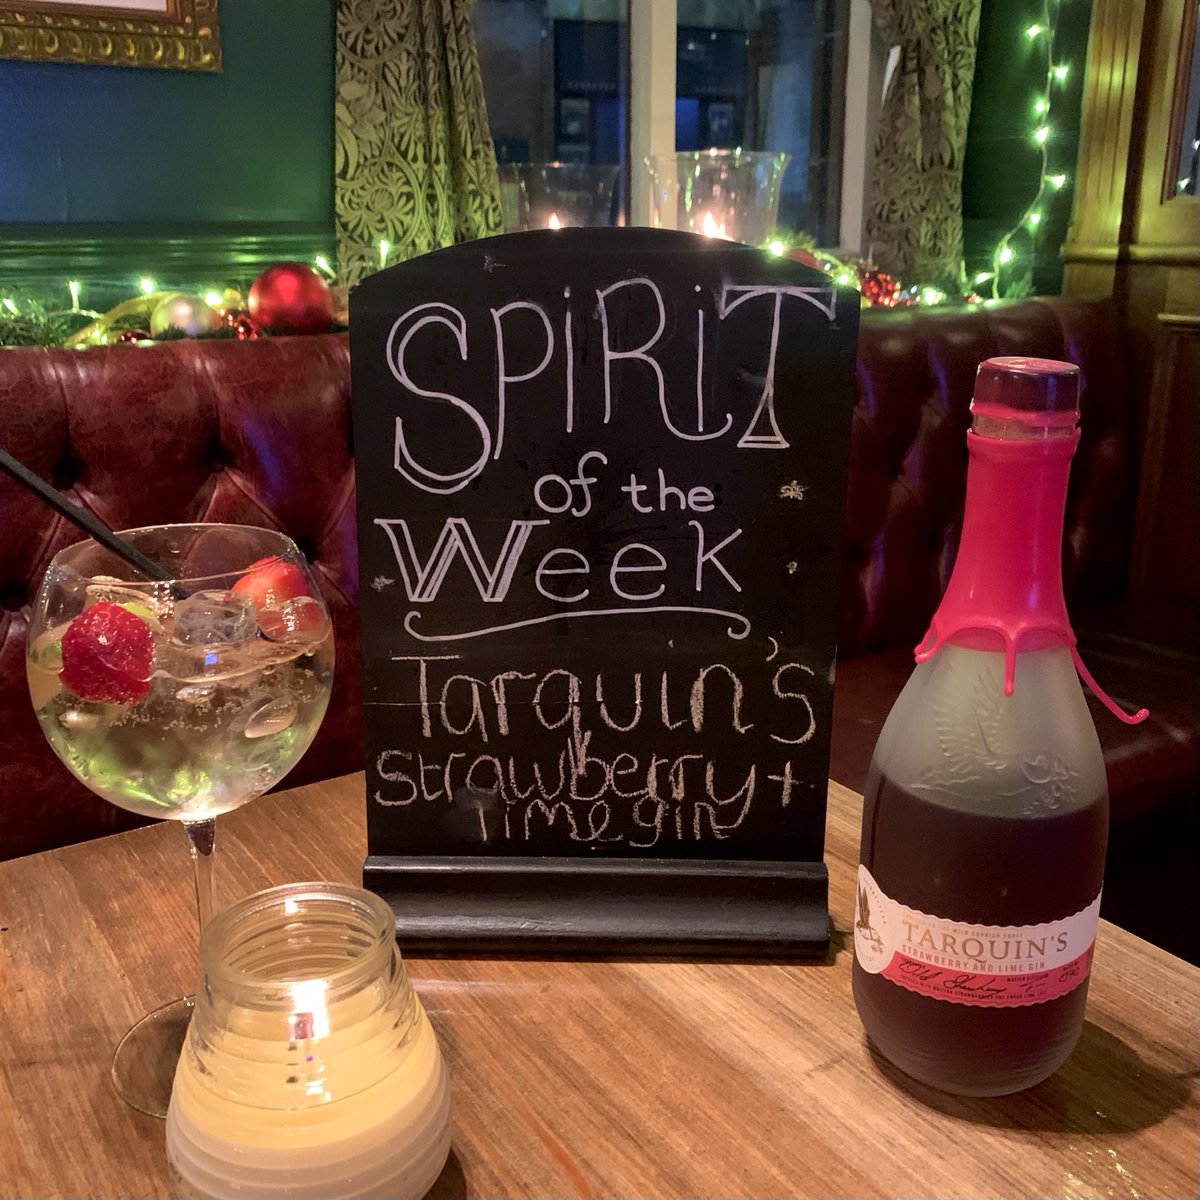 Spirit of the Week… with a sneak peak of the start of our Christmas decorations 🤭🎄 Tarquin’s Strawberry & Lime gin🍓 #nicholsons #nicholsonspubs #leeds #leedspubs